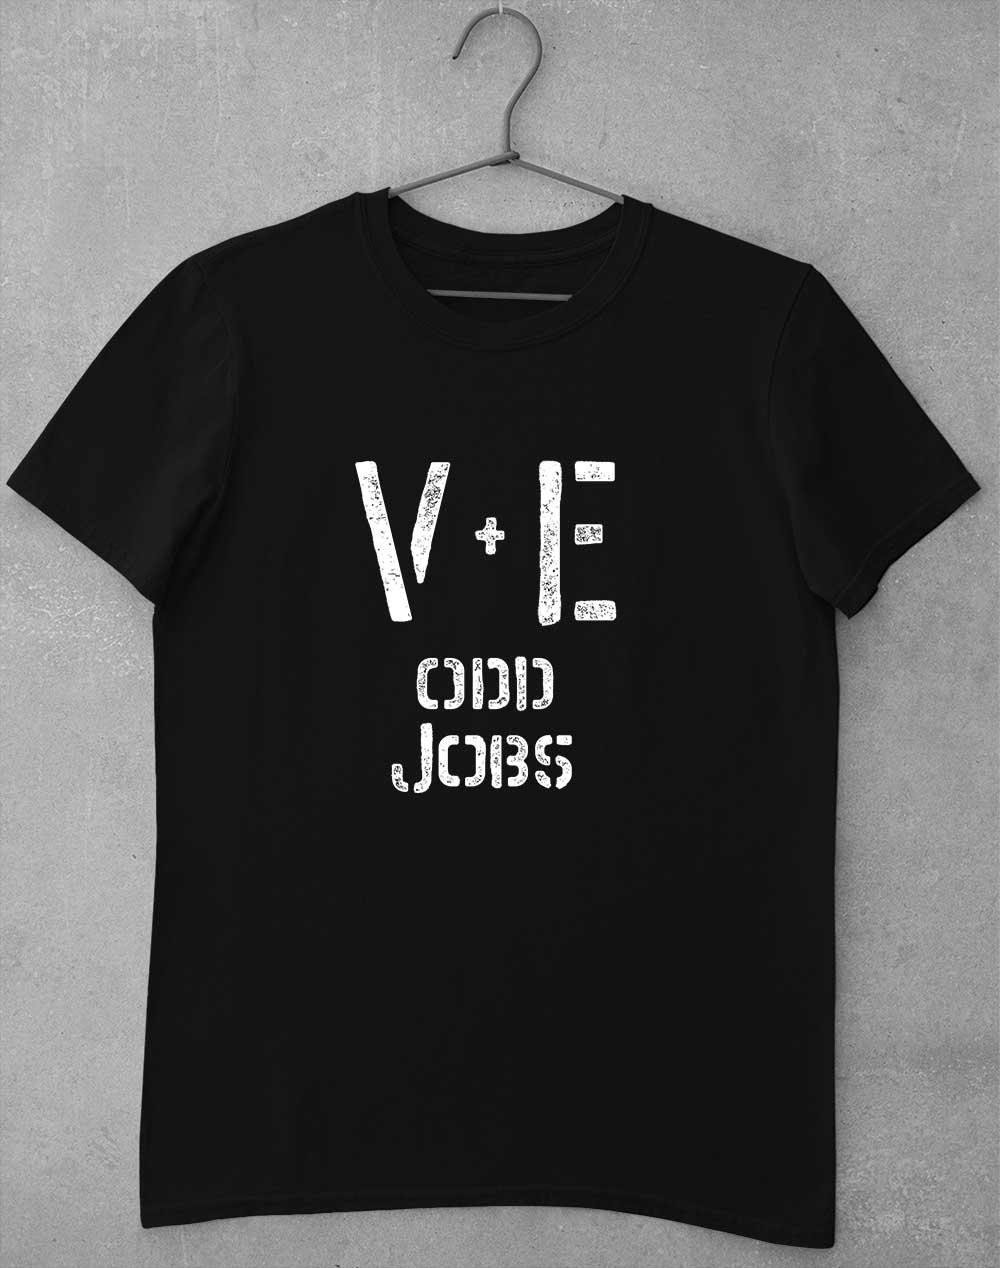 Val and Earl's Odd Jobs T-Shirt S / Black  - Off World Tees